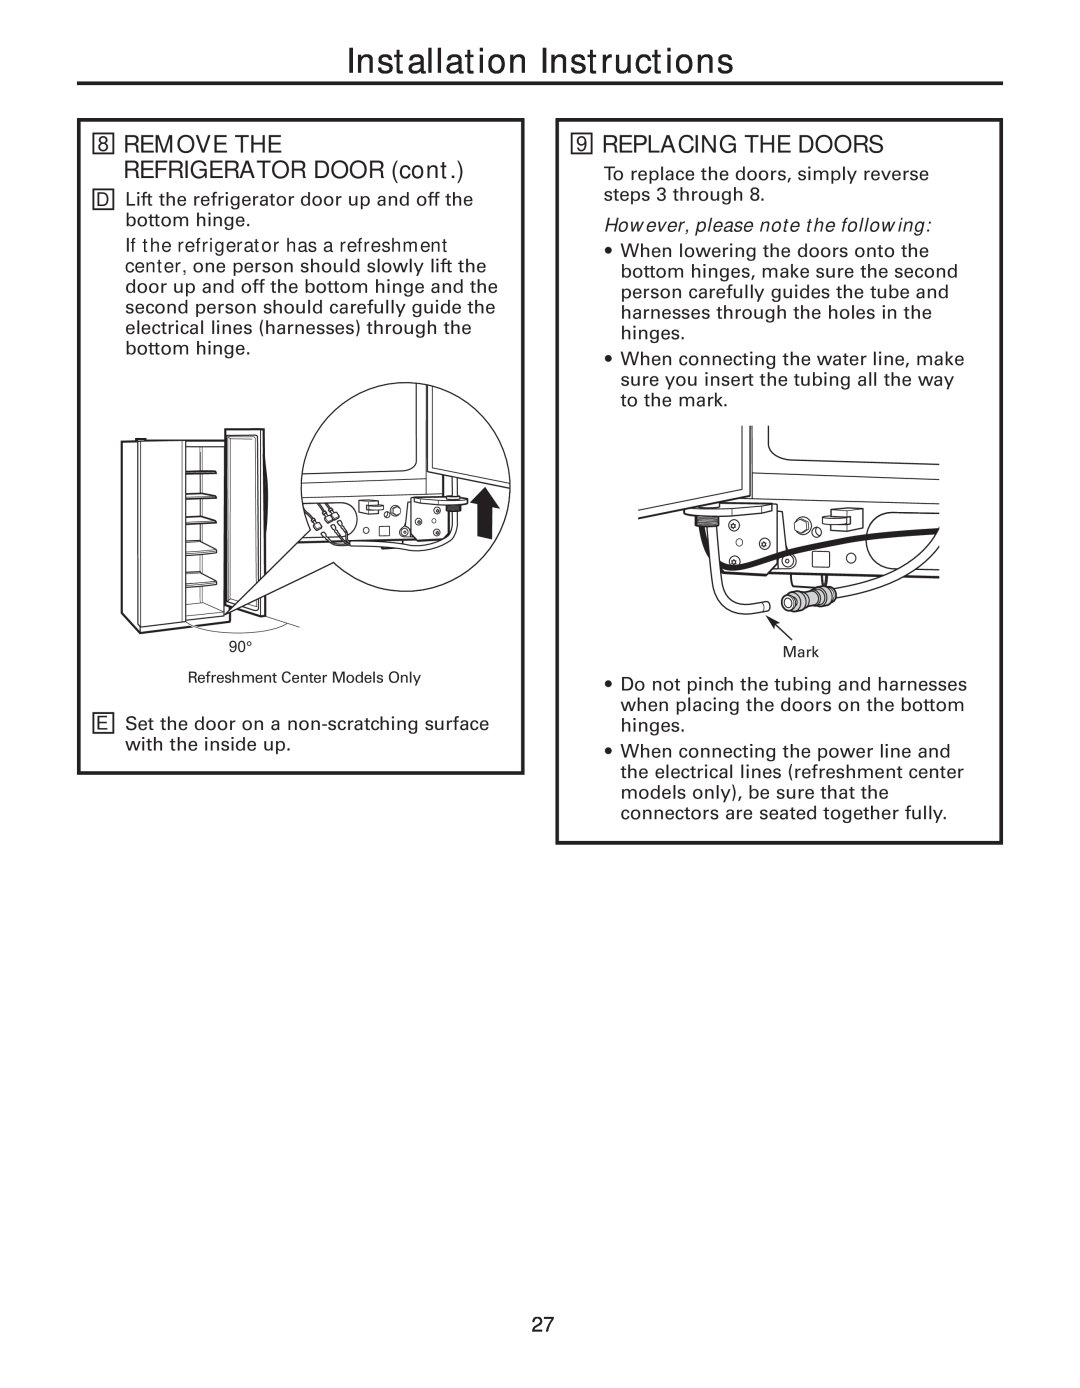 GE 200D8074P043, 49-60637 manual Replacing The Doors, However, please note the following, Installation Instructions 